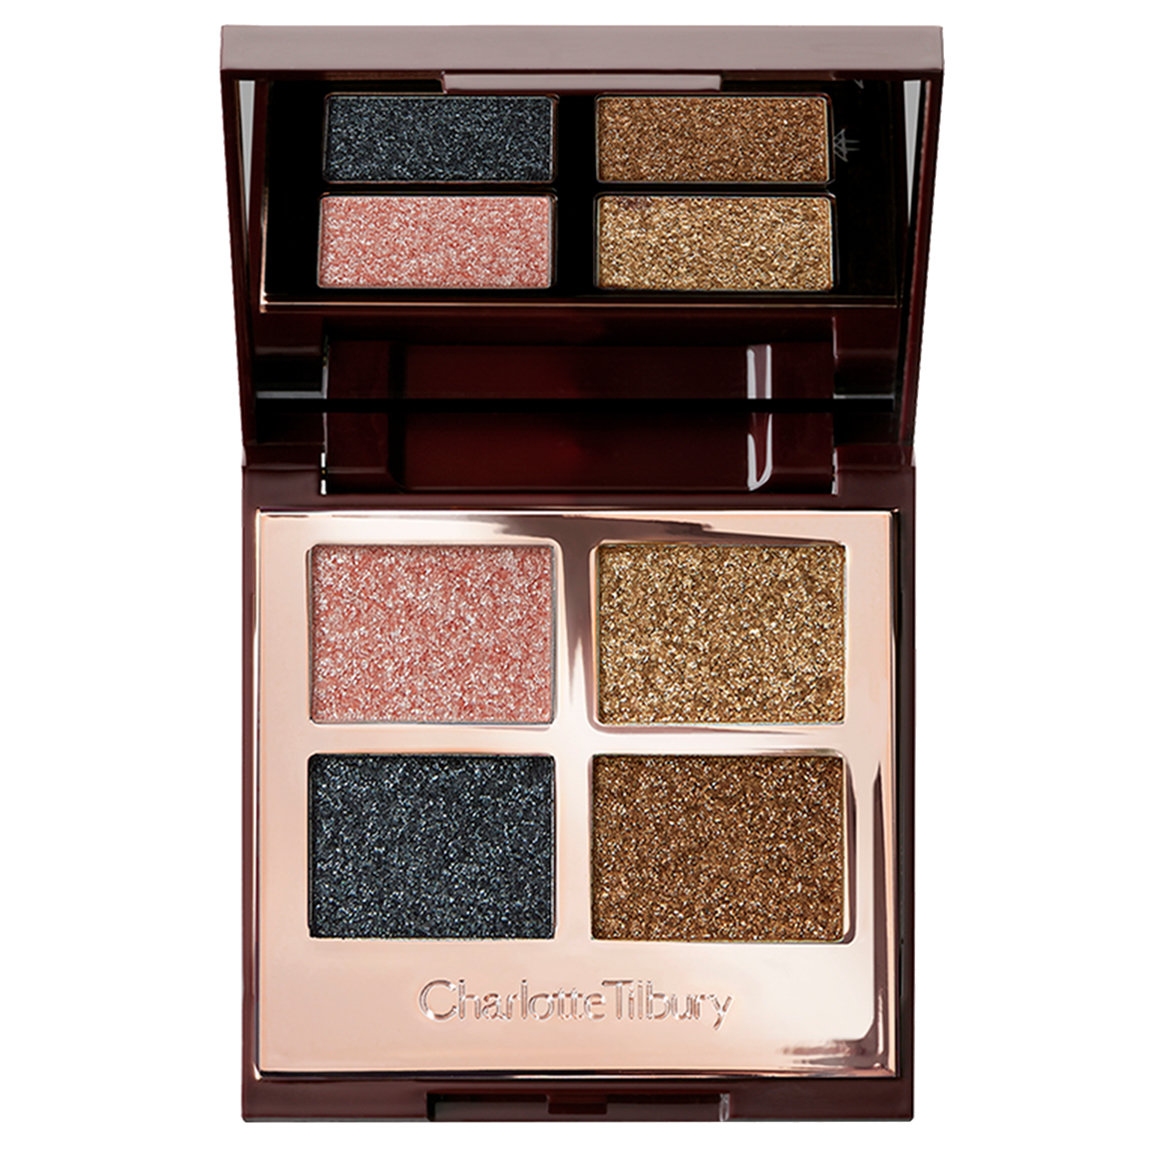 Free full-size Luxury Palette of Pops with your qualifying Charlotte Tilbury purchase